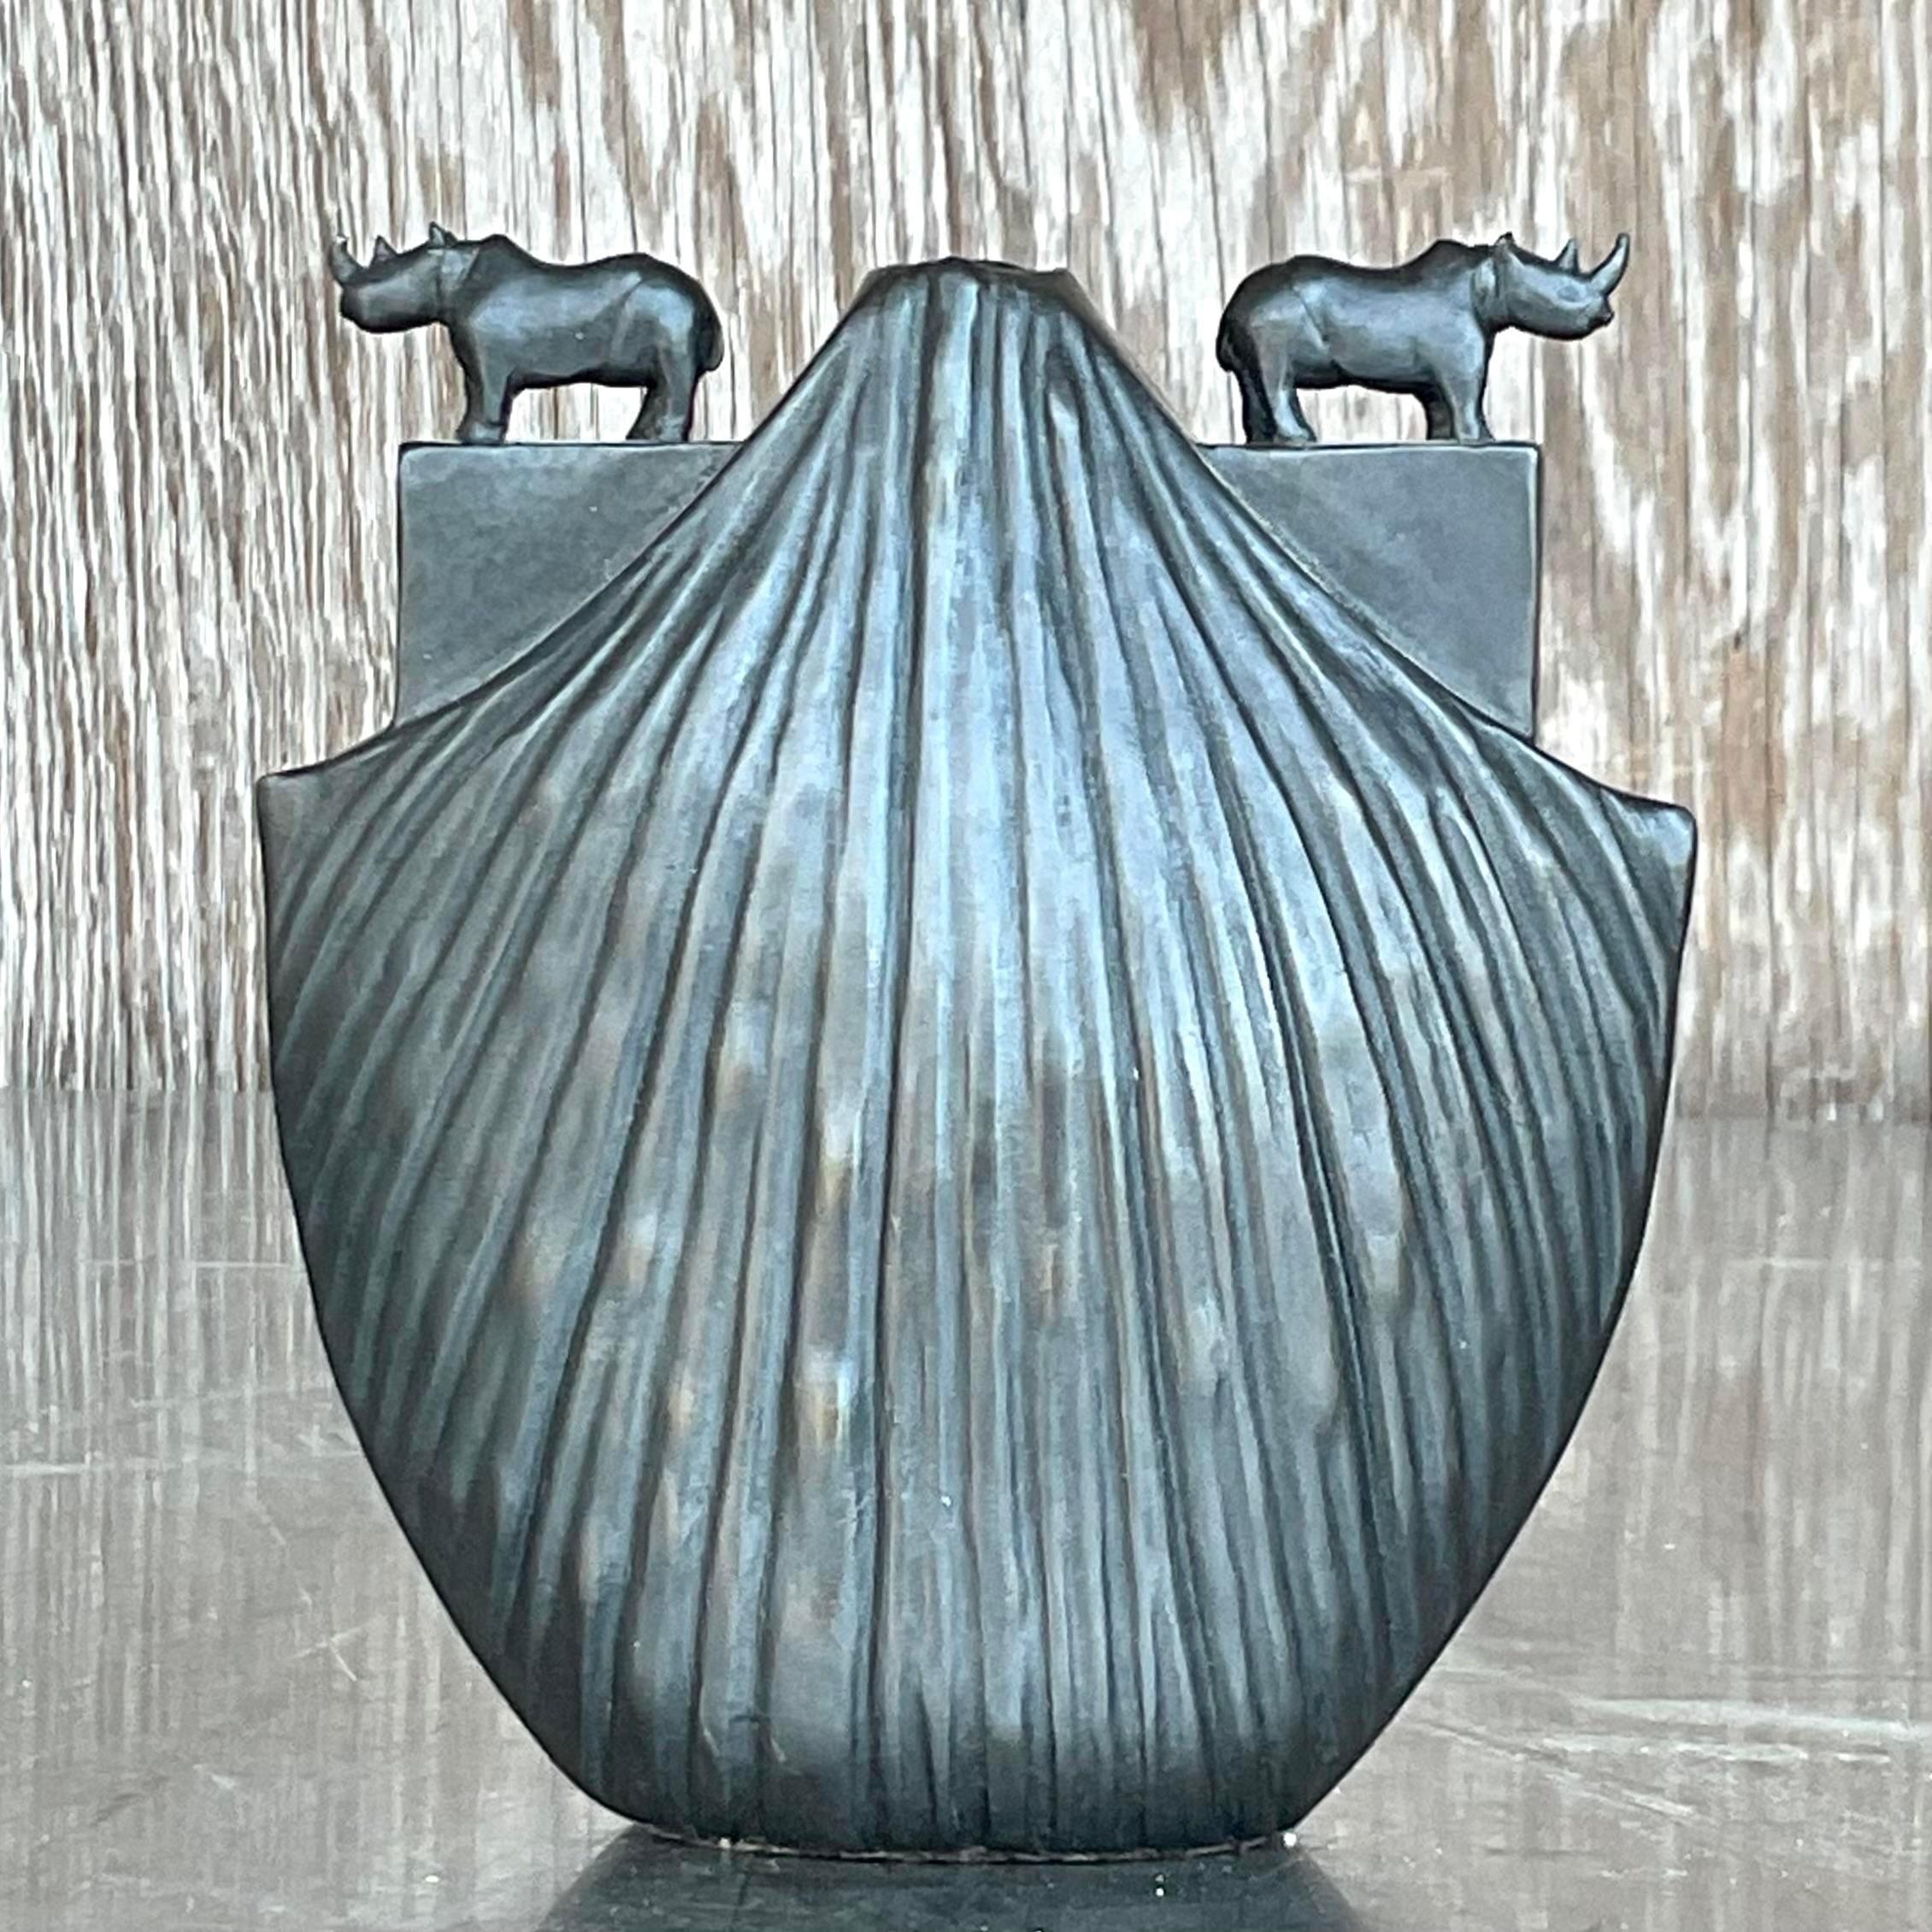 A stunning vintage bronze rhino vase. Hand made by the Pozycinski group. Acquired from a Palm Beach estate.